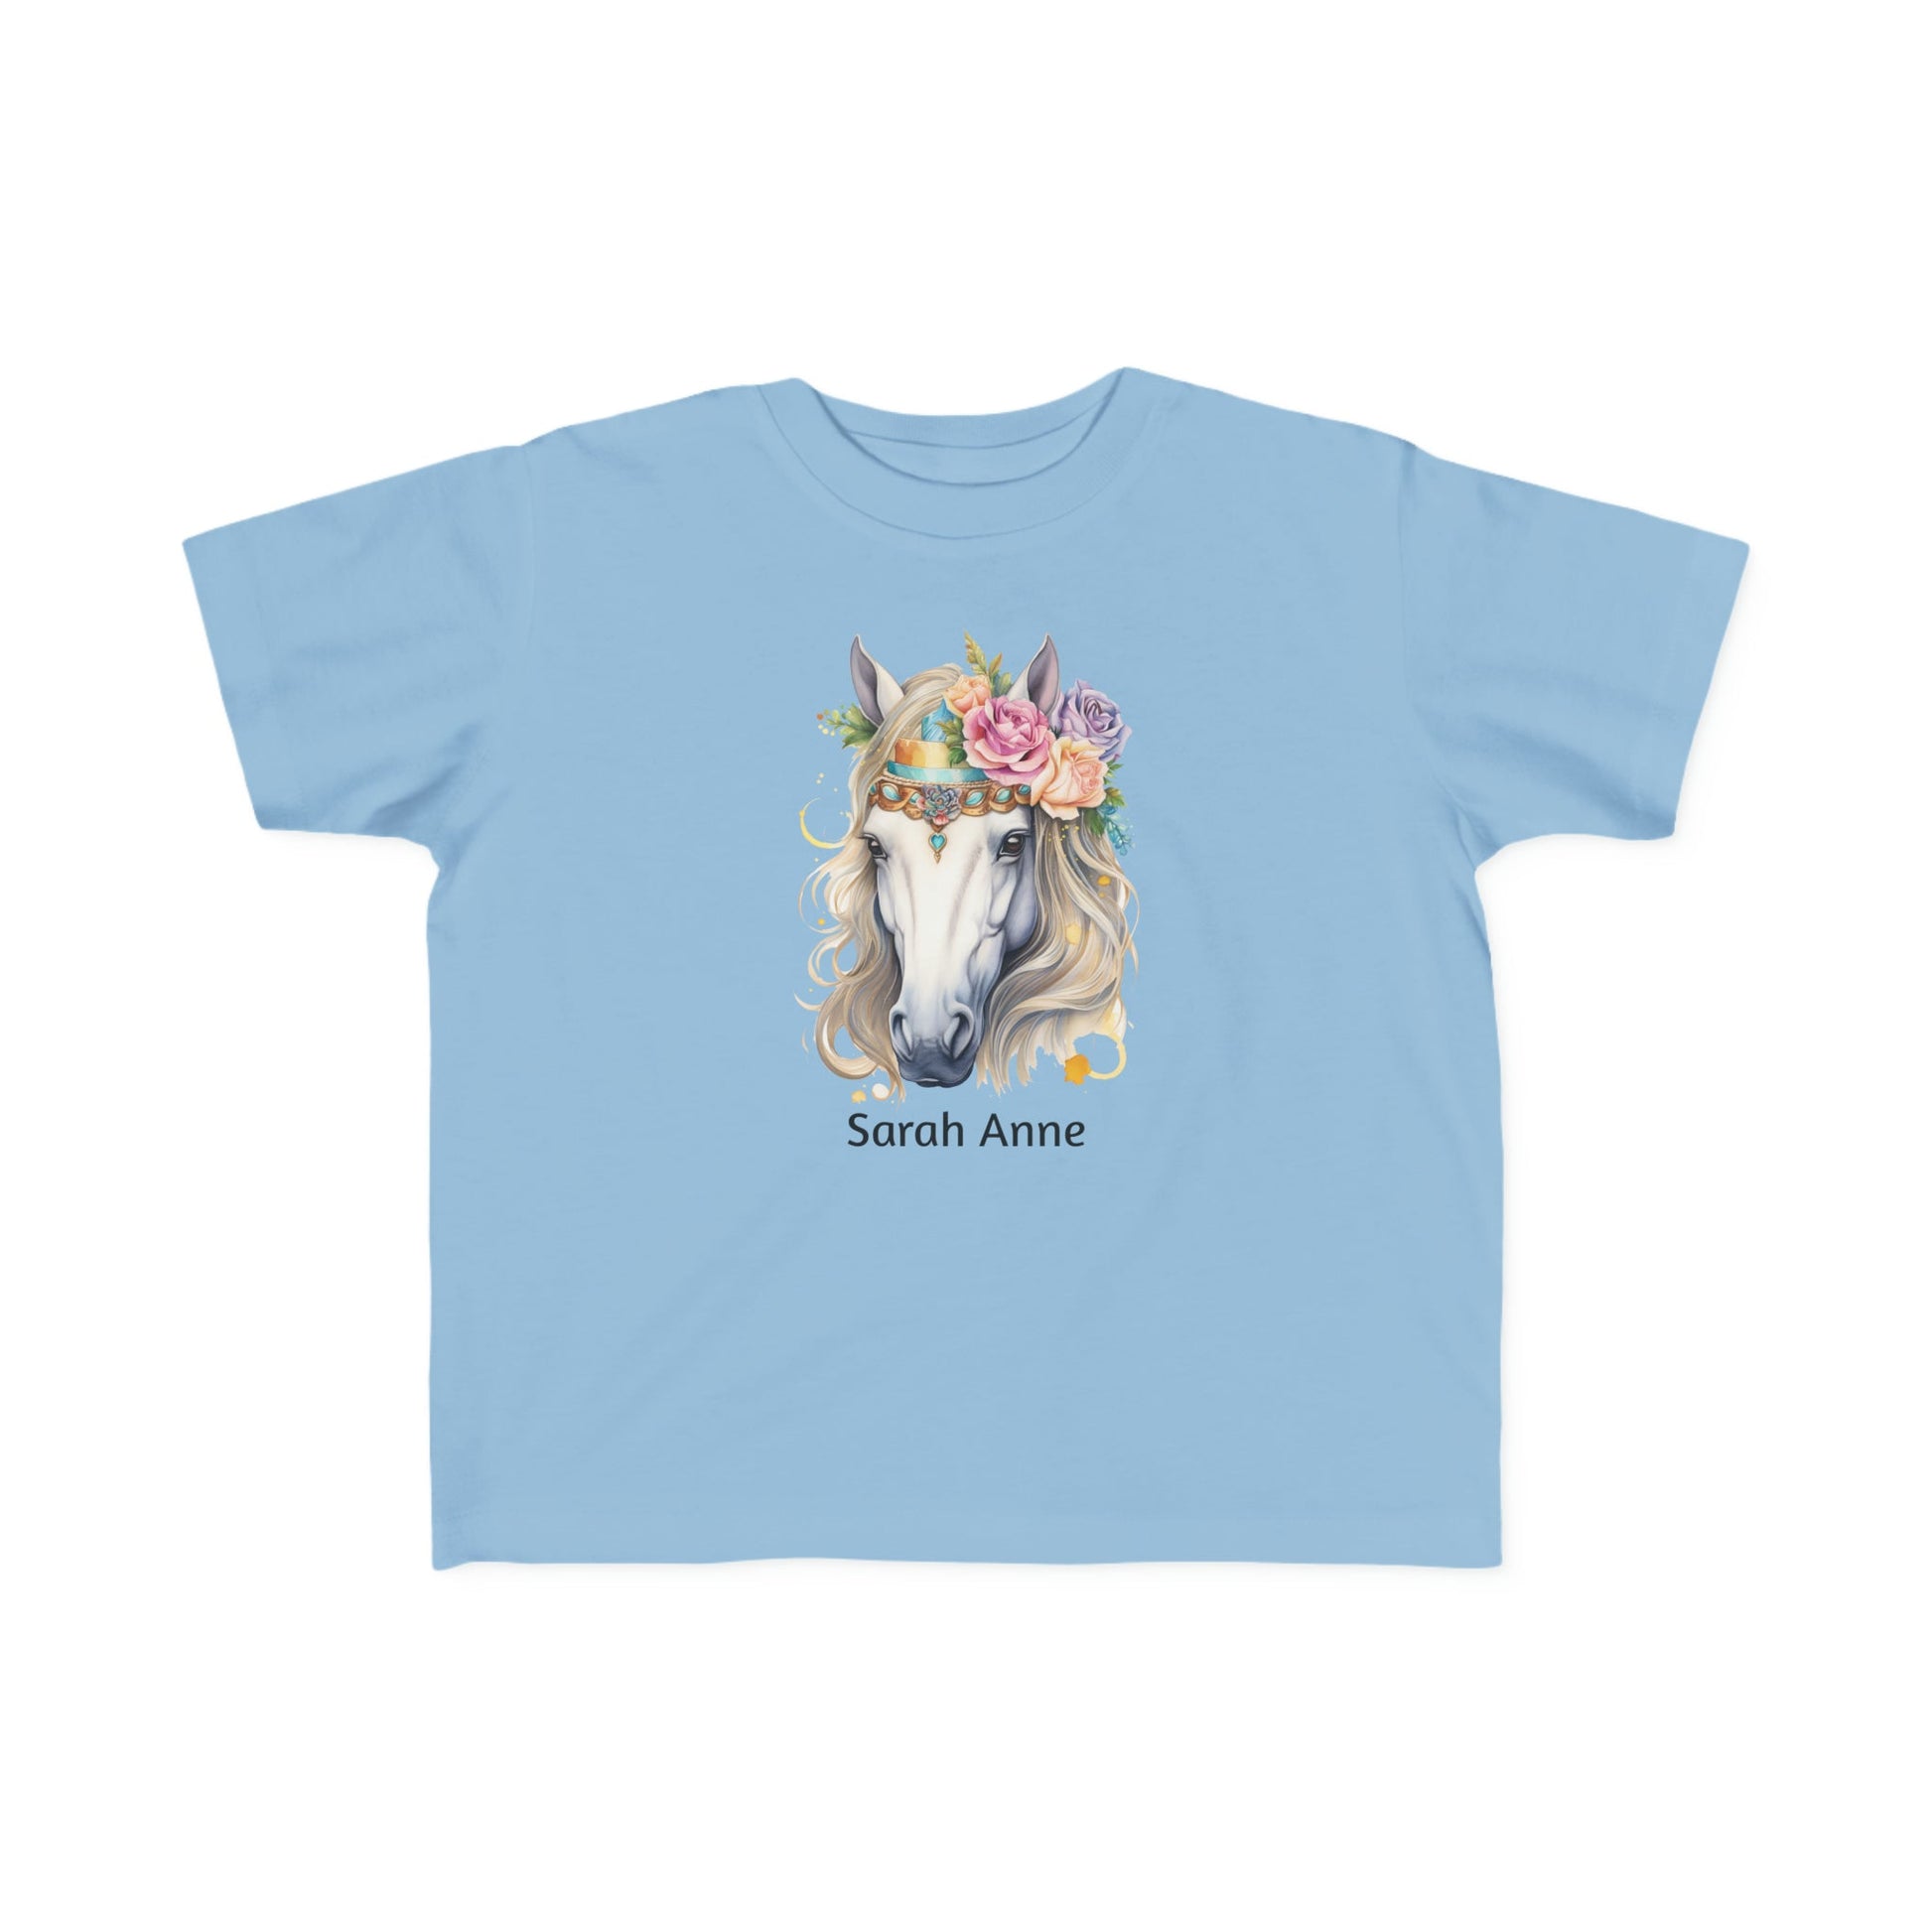 Personalized Toddler Girl Horse Shirt - Horse Youth or Toddler Cotton Tees for Horse Lover Girls - FlooredByArt